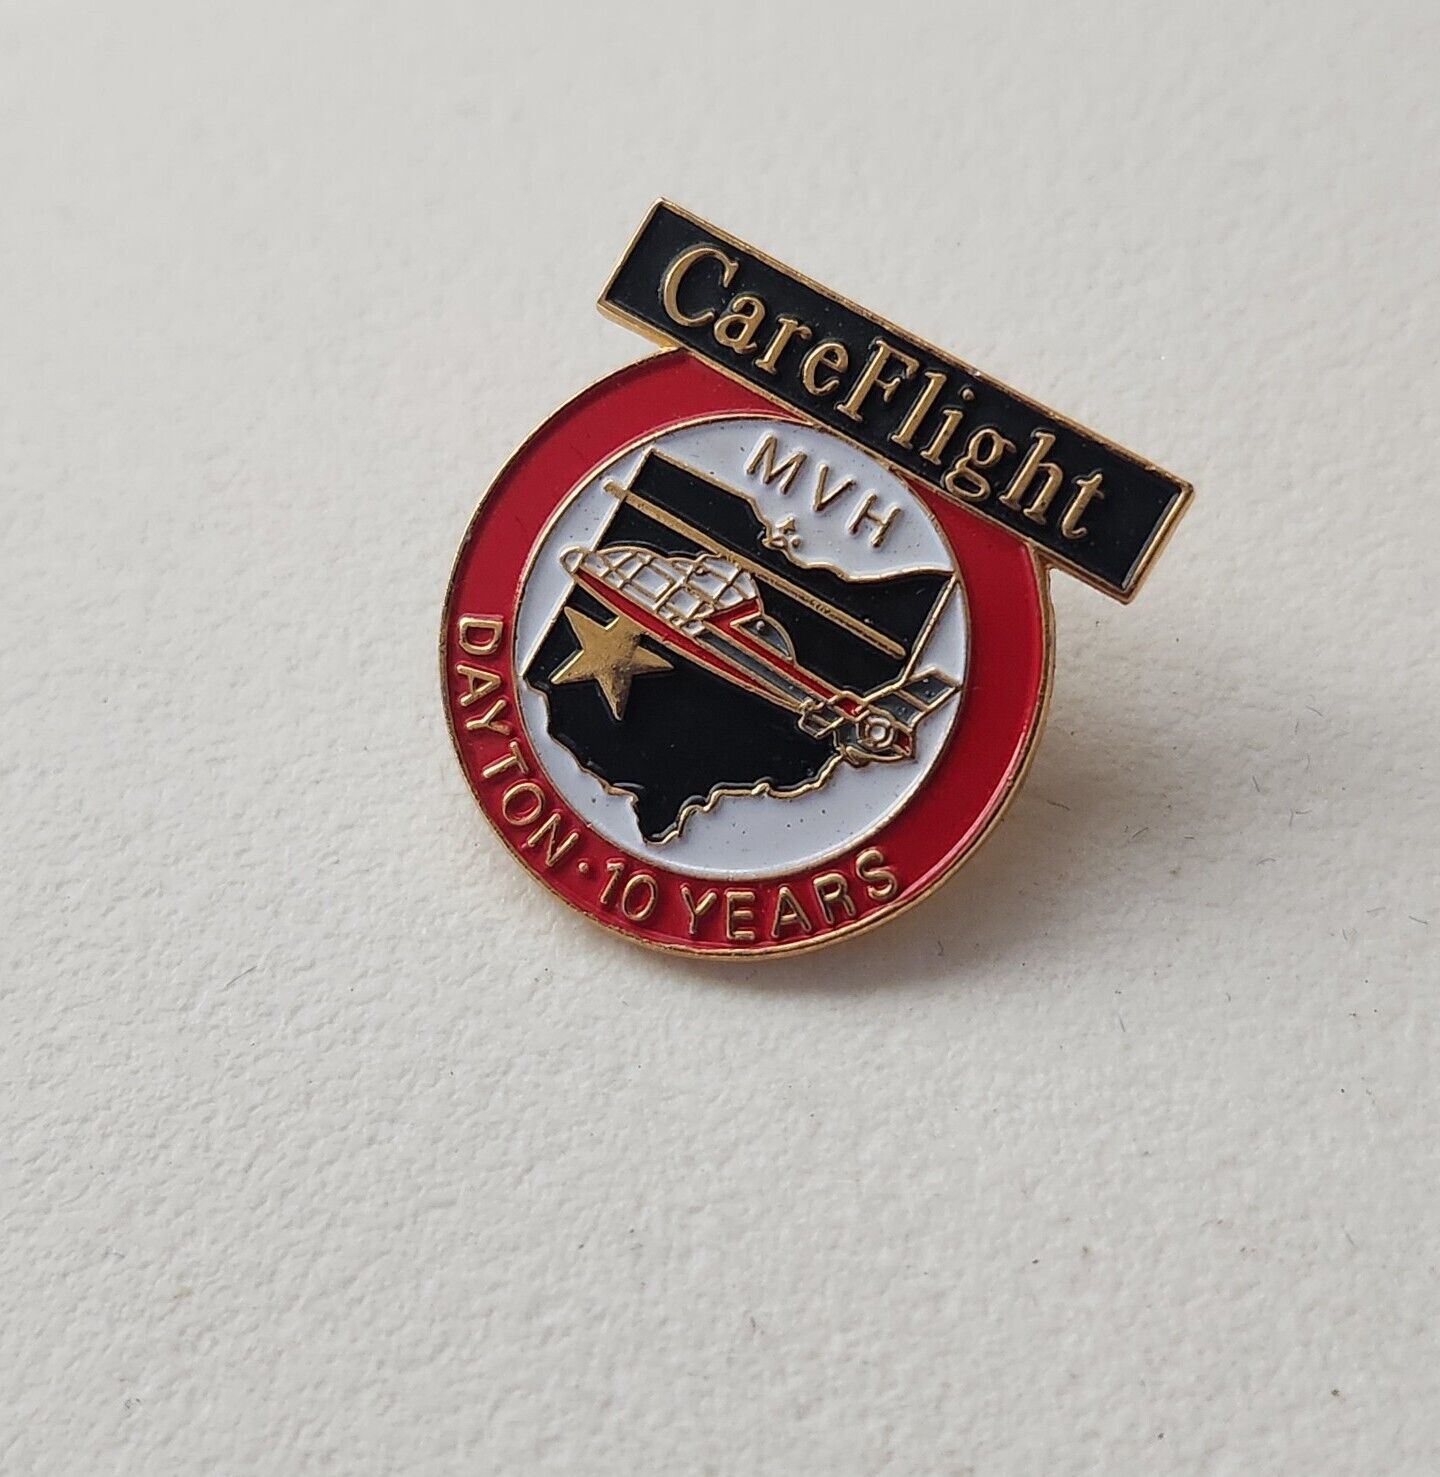 Miami Valley Hospital CareFlight Helicopter Lapel Pin 10 Years Care Flight